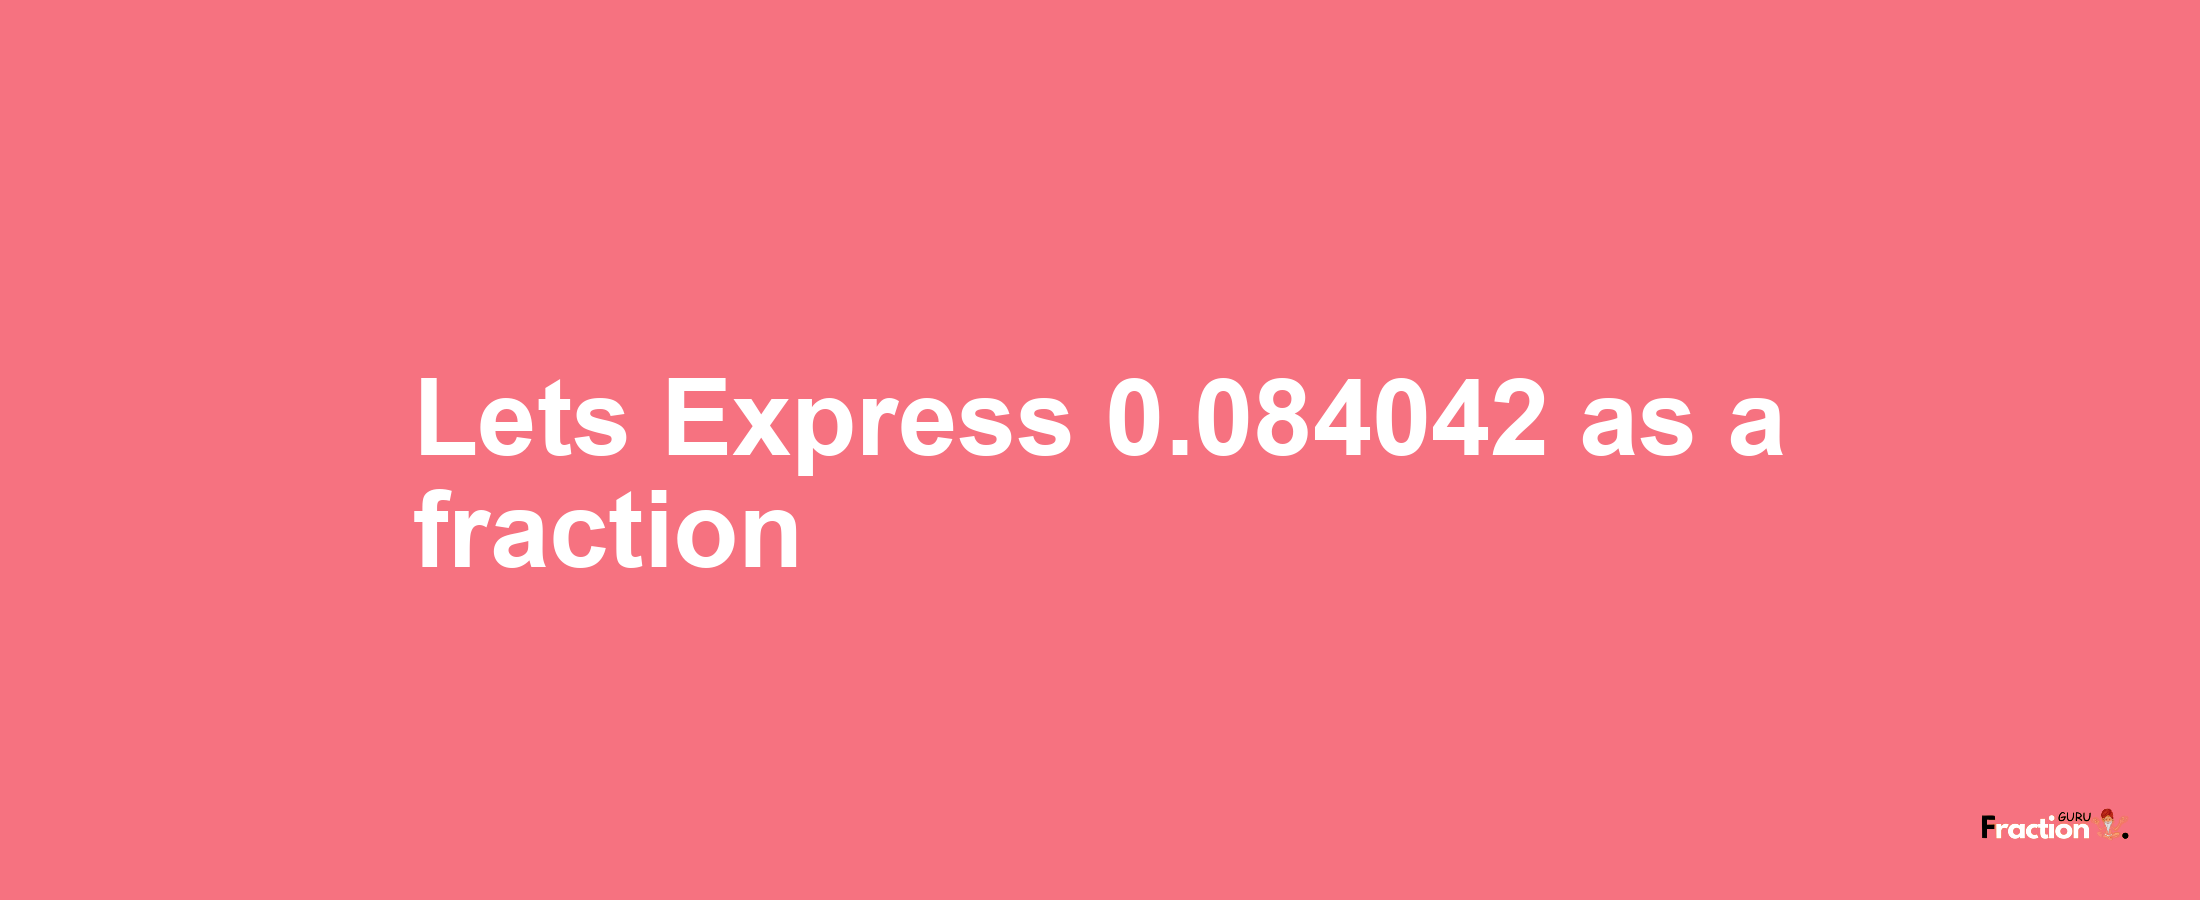 Lets Express 0.084042 as afraction